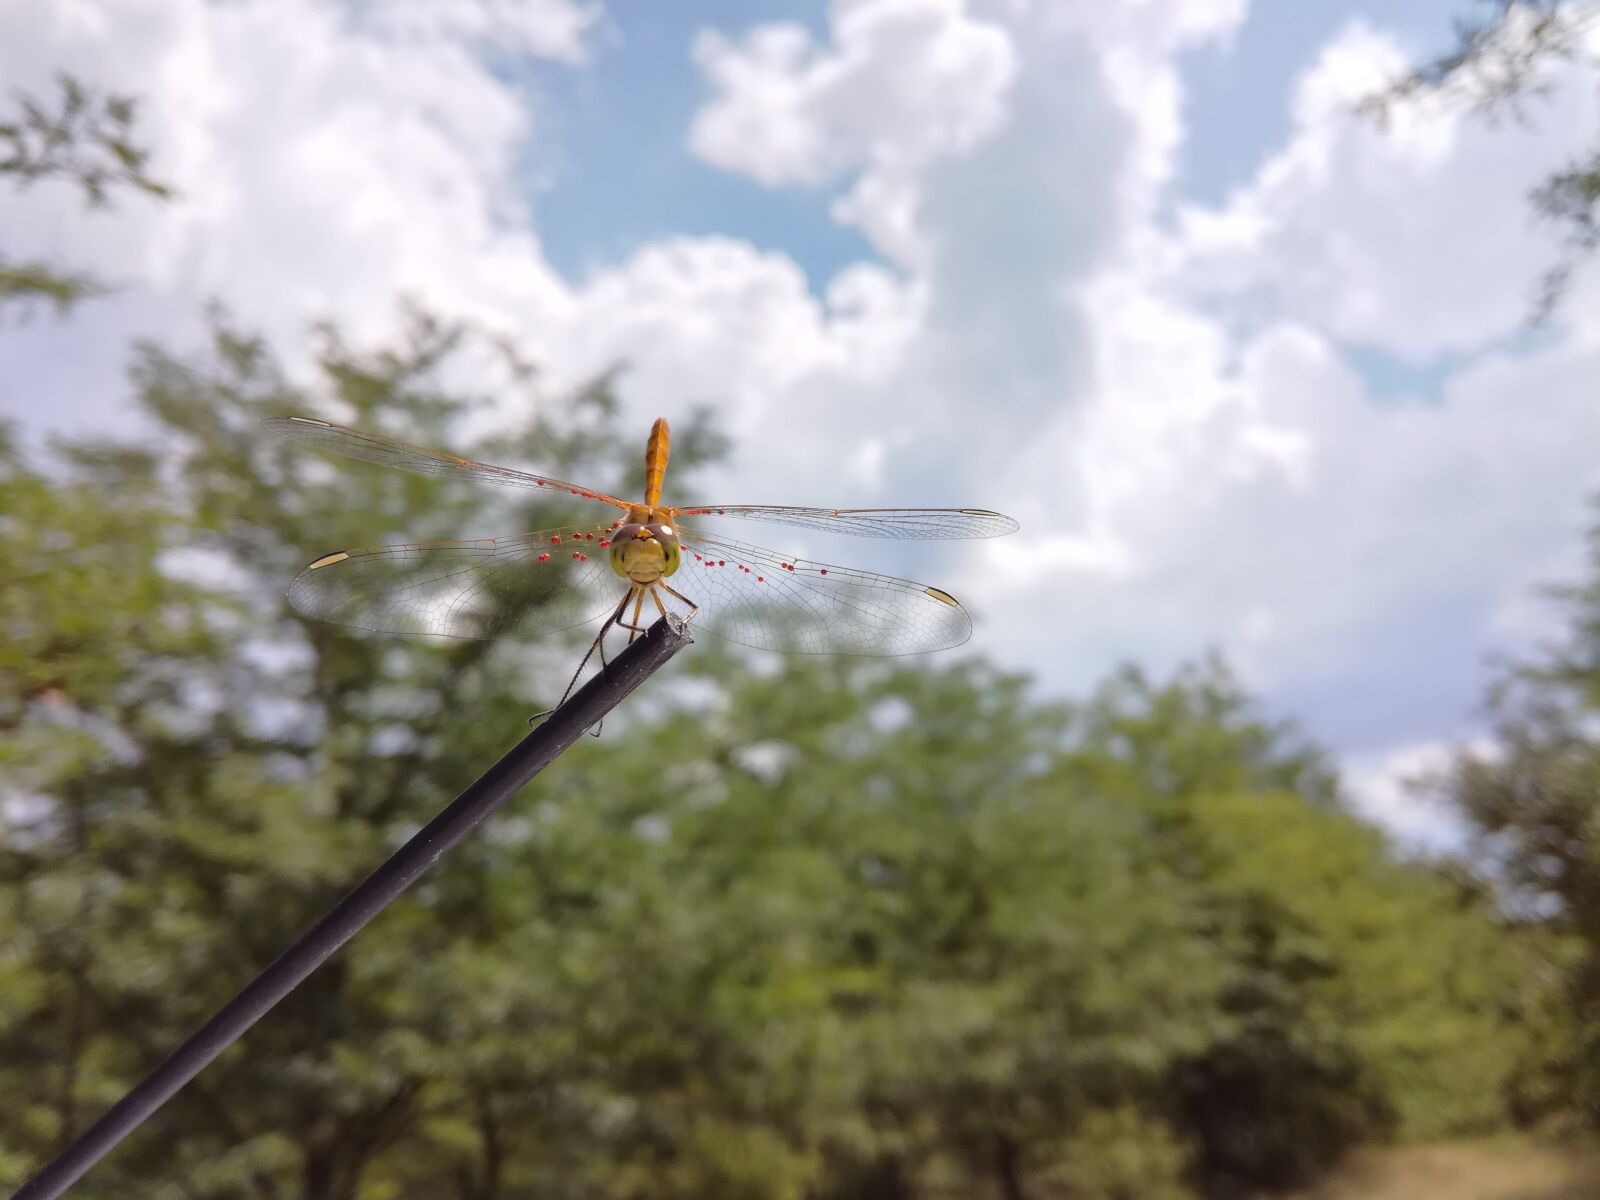 HUAWEI Honor 5C sample photo. Dragonfly, outdoor, wildlife photography